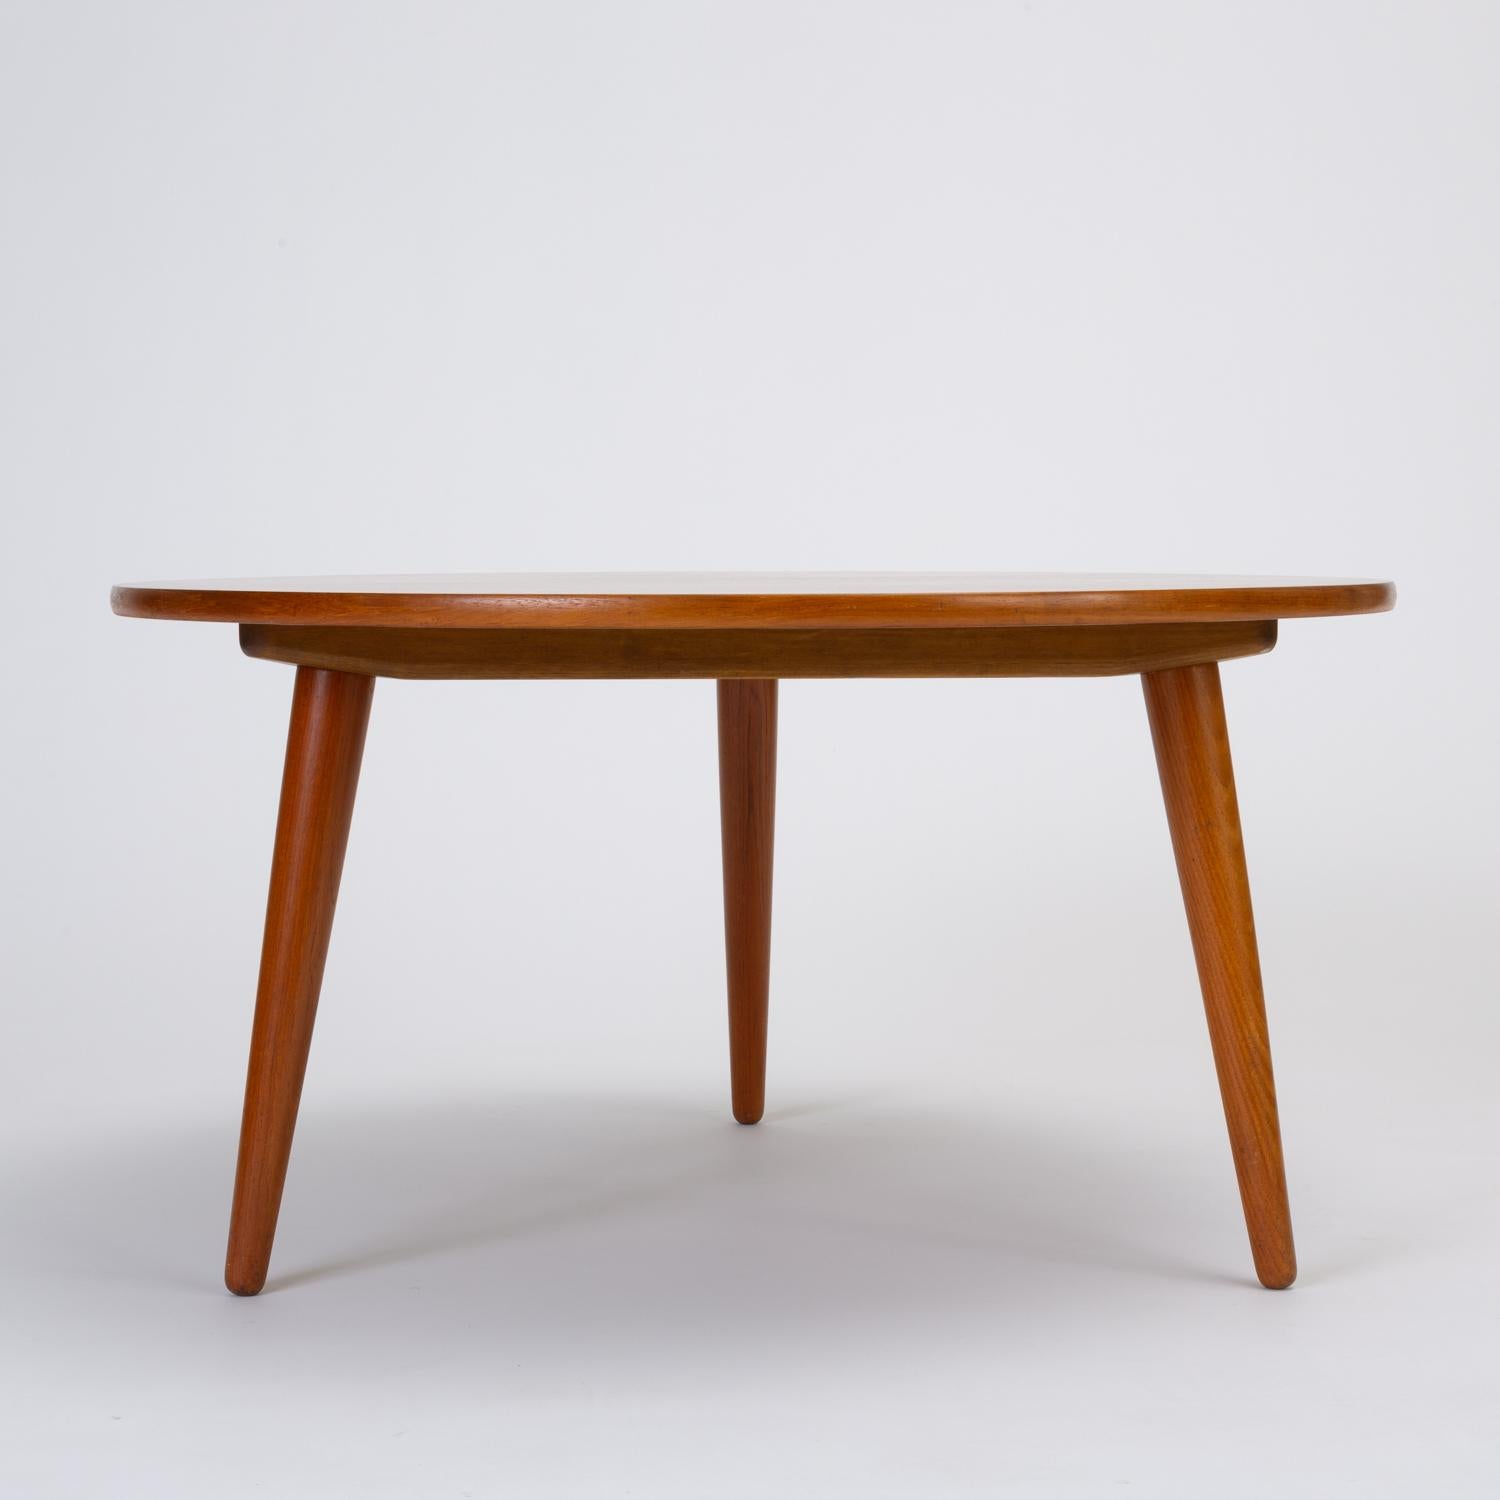 Designed by Hans Wegner in 1954 for Andreas Tuck, the AT-8 coffee table has a round teak surface and sits on three tapered dowel legs of solid teak. The oak apron beneath the table is stamped with the Andreas Tuck/Hans Wegner manufacturer's mark.